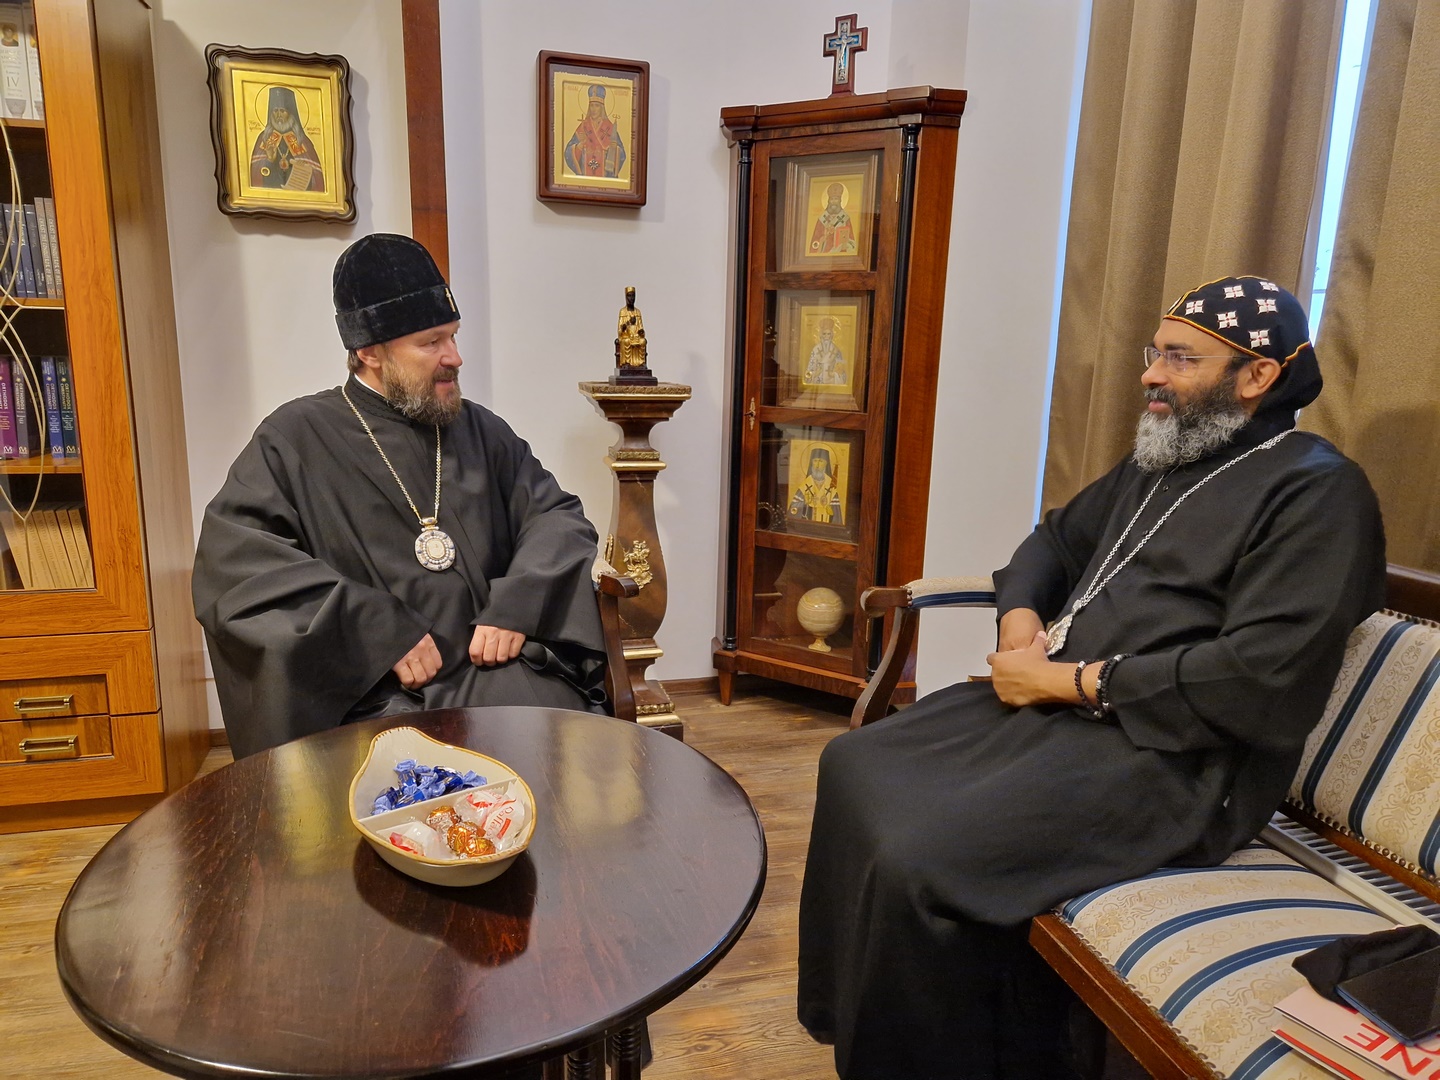 Metropolitan Hilarion of Budapest and Hungary received Metropolitan Abraham Stephanos of the UK, Europe, and Africa